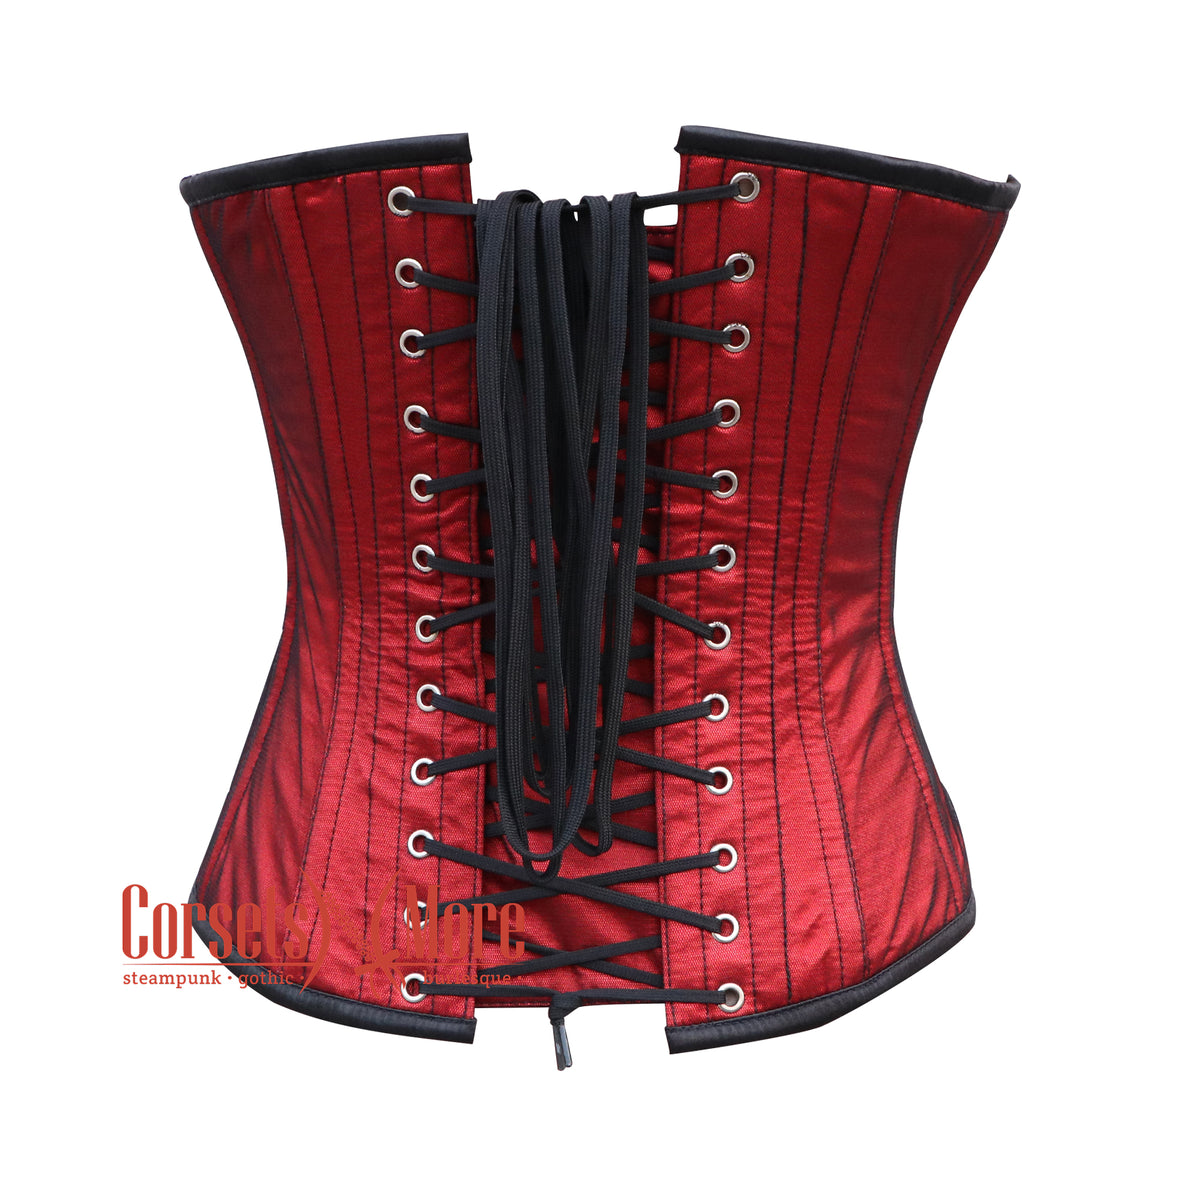 Fashion Womens Sexy Vintage Gothic Dotted Corset Bustier Color Red 